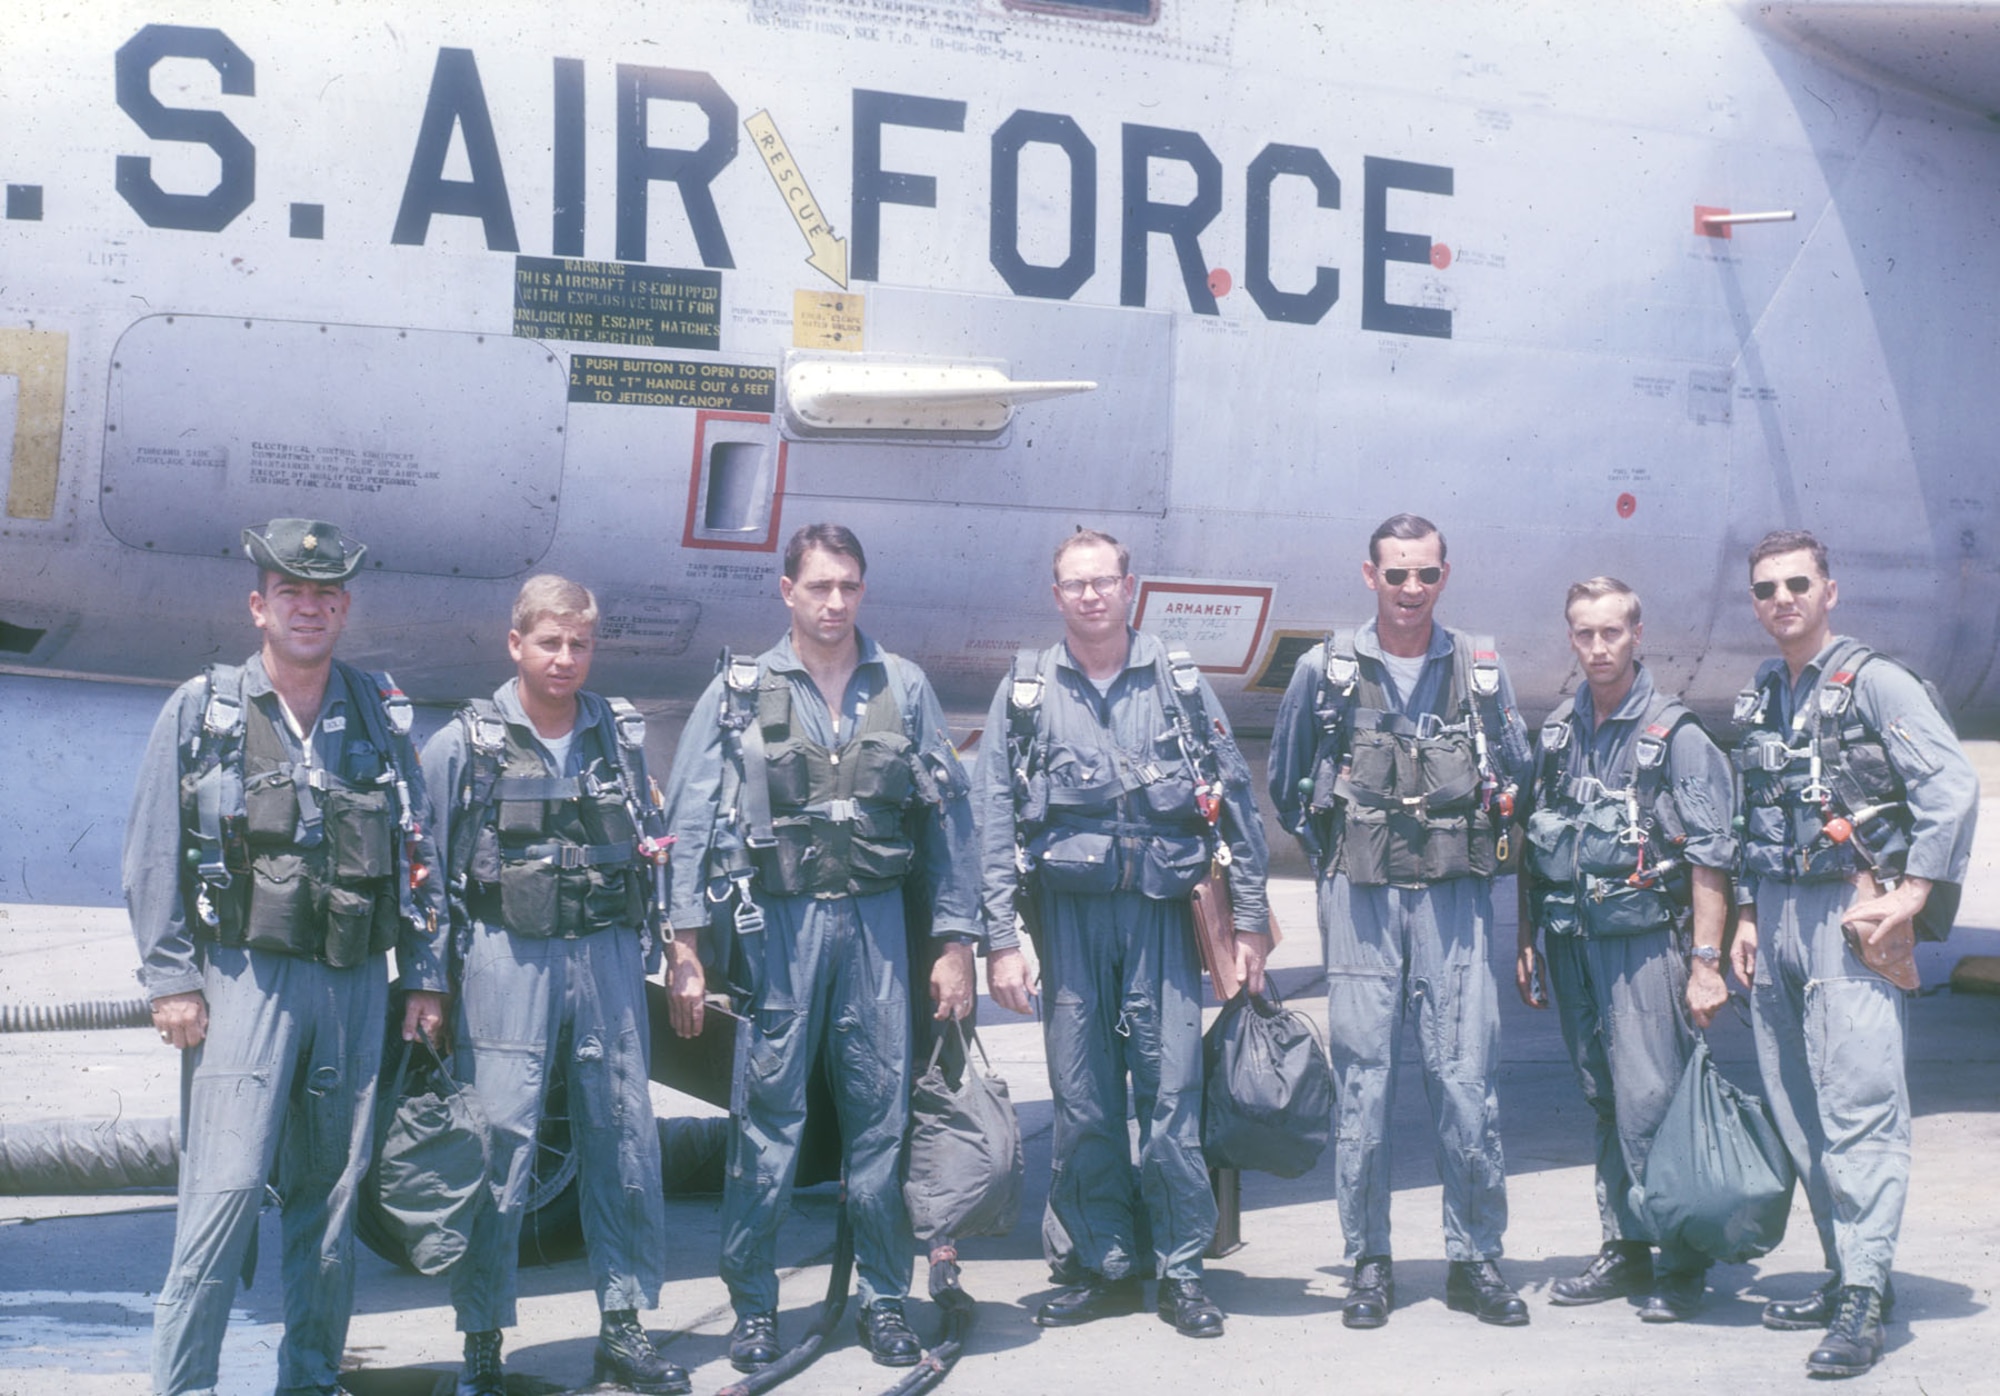 RB-66C crew at Takhli in early 1966 (the RB-66C was later designated the EB-66C). The typical RB-66C crew consisted of the pilot/aircraft commander, navigator, flight engineer, and four electronic warfare officers (EWOs). (U.S. Air Force photo)